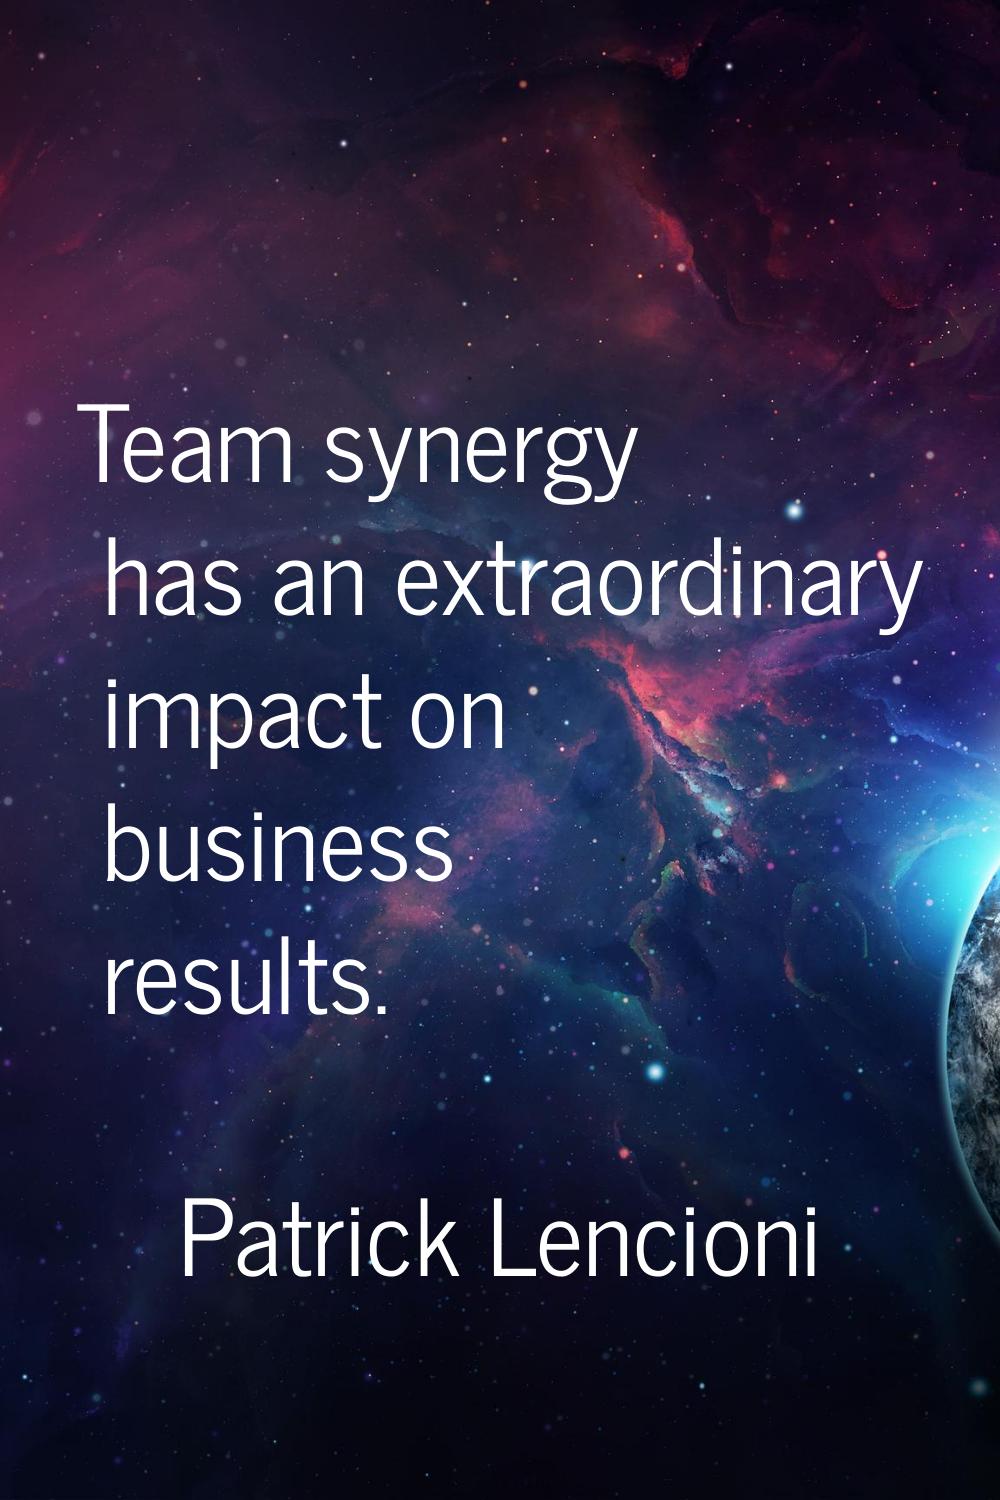 Team synergy has an extraordinary impact on business results.